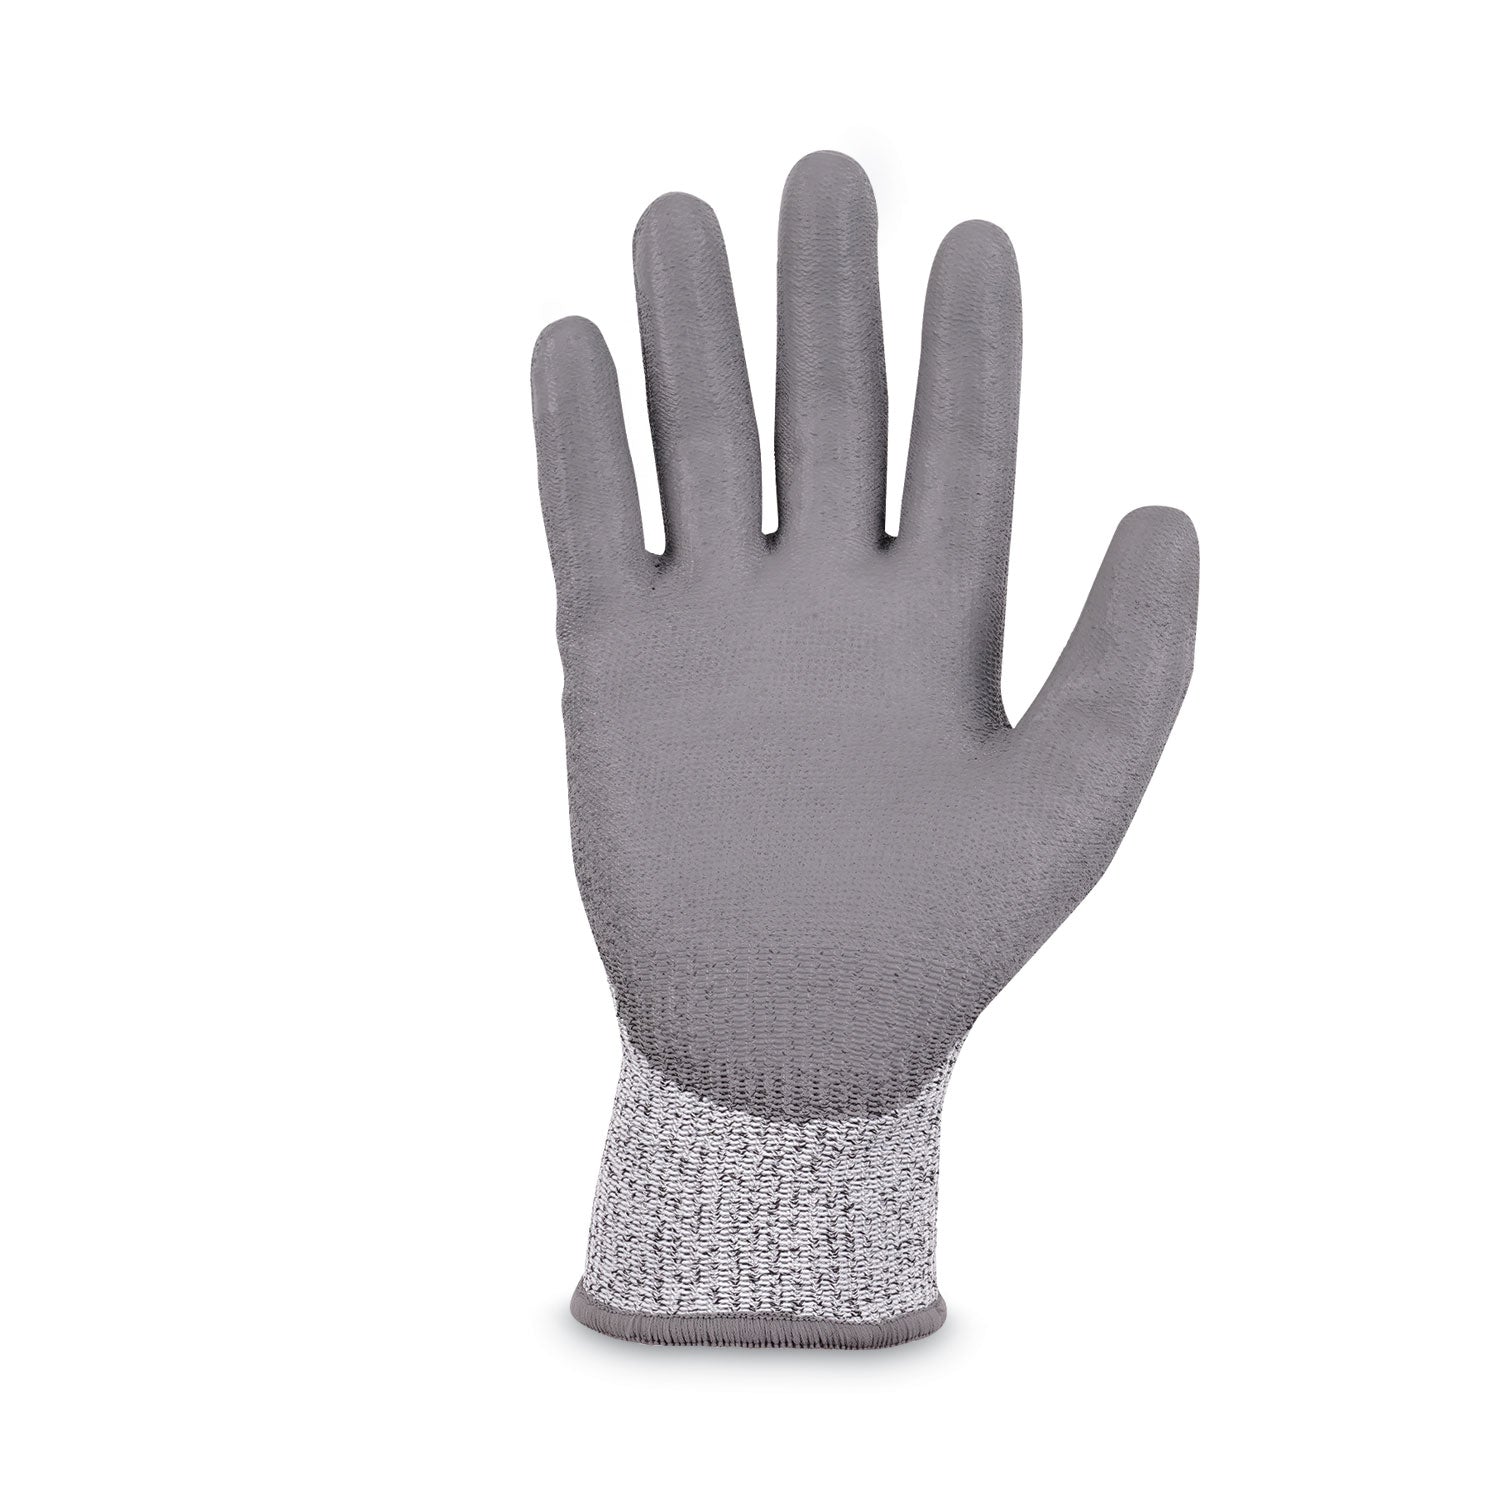 proflex-7030-ansi-a3-pu-coated-cr-gloves-gray-large-pair-ships-in-1-3-business-days_ego10464 - 7